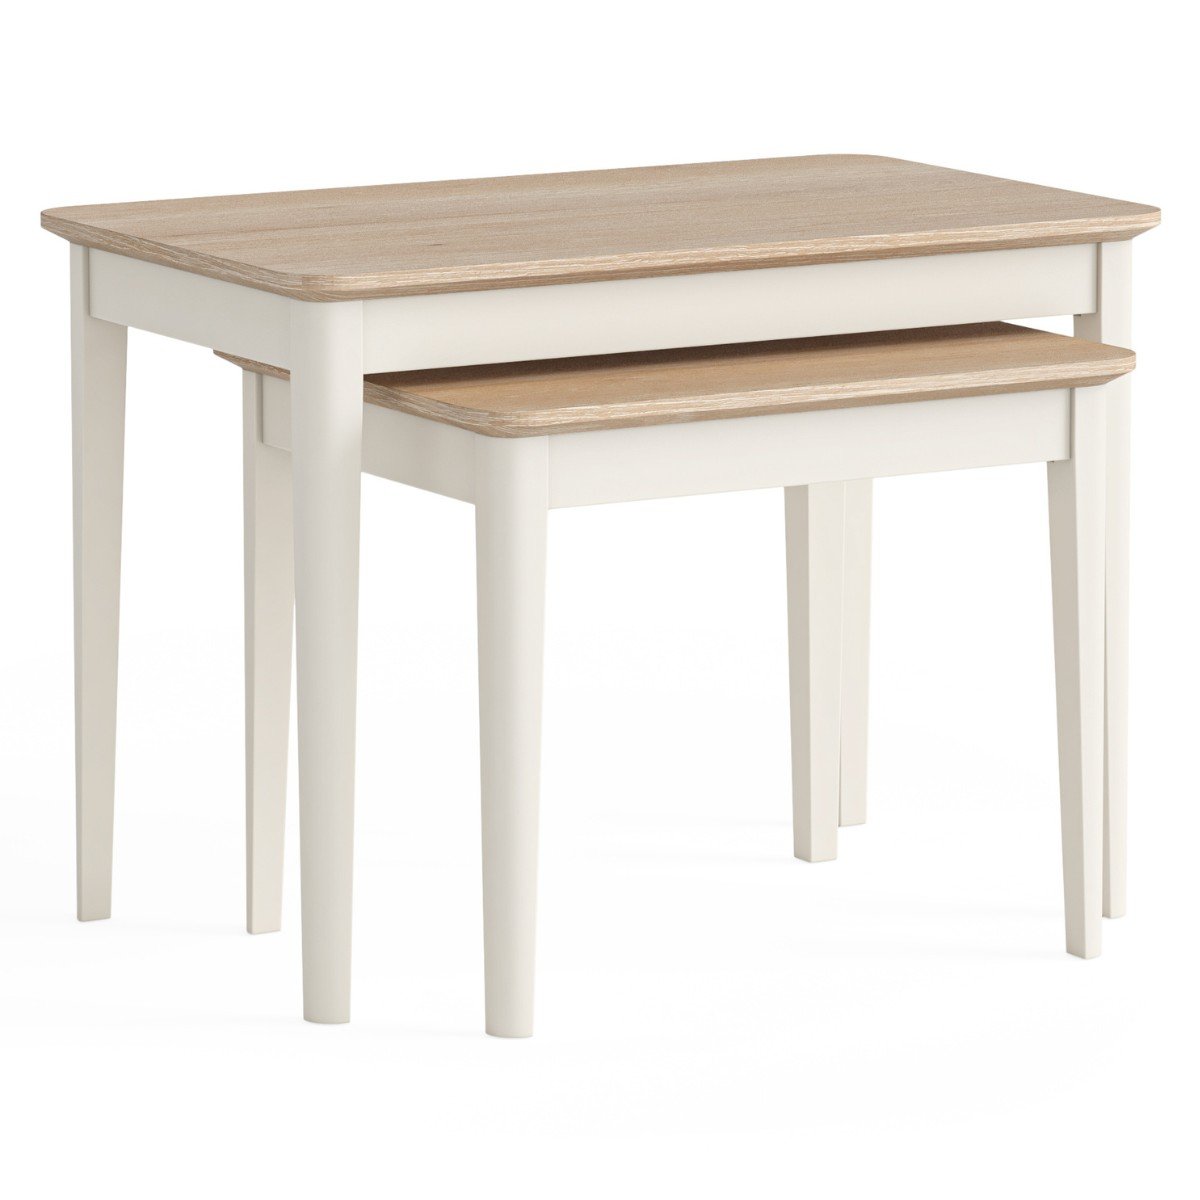 Marcella White Nest of Tables - 1